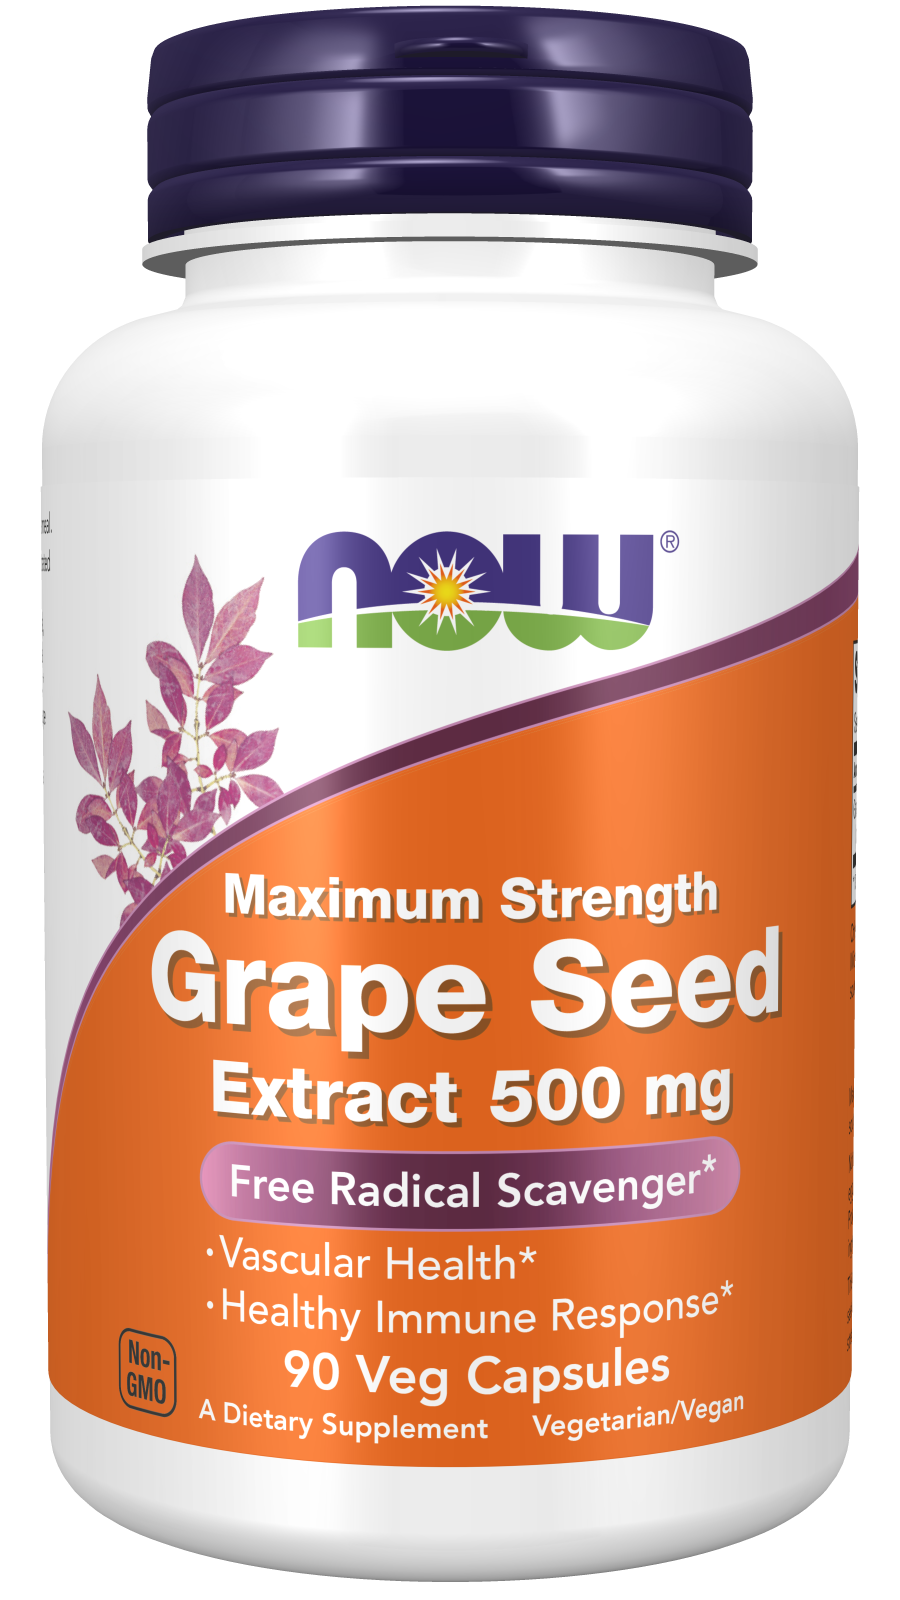 Grape Seed Extract 500 mg - 90 Veg Capsules Bottle Front